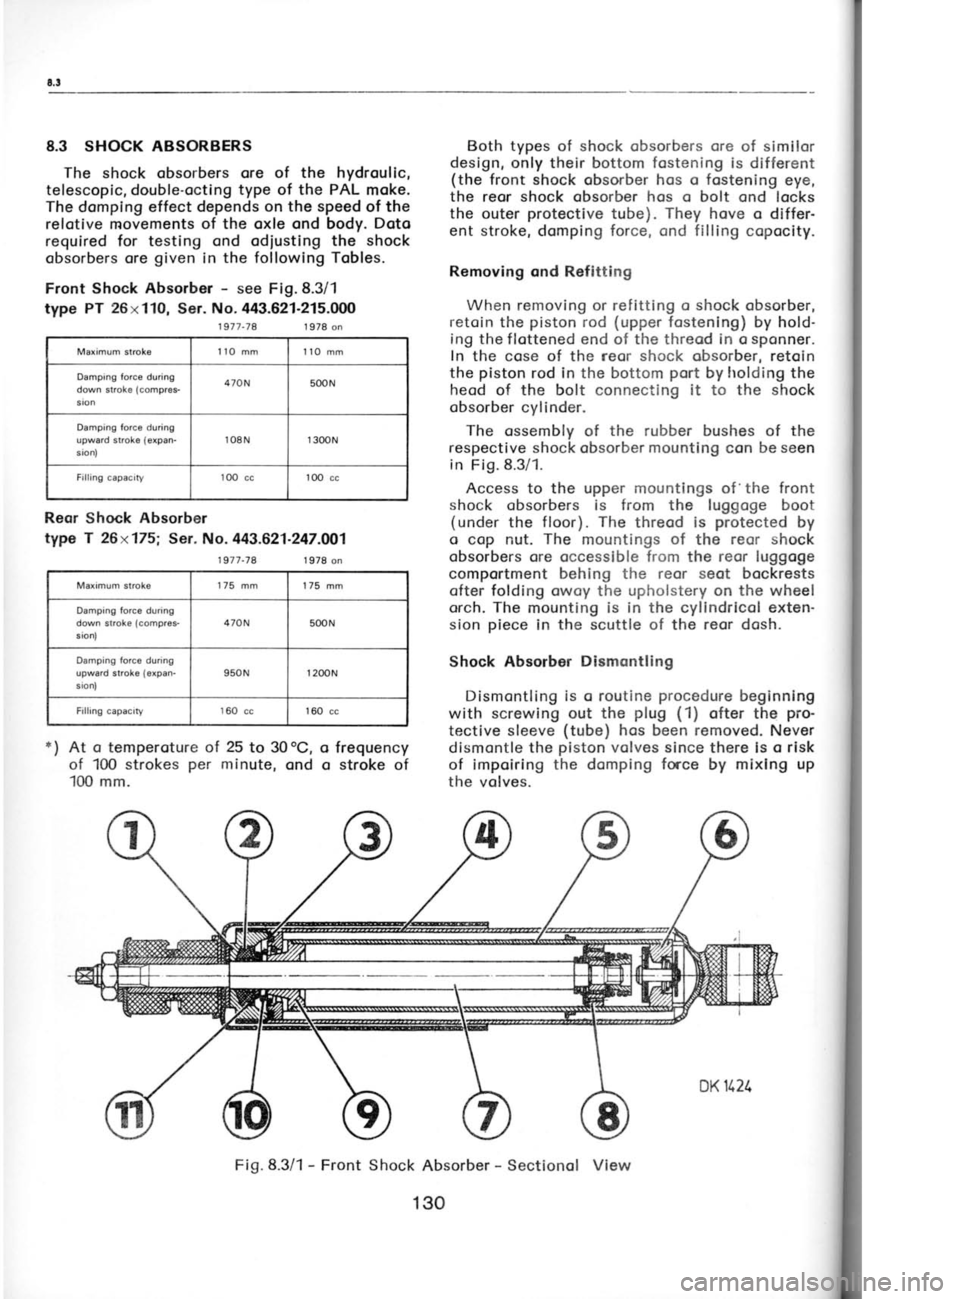 SKODA 120 LSE 1980  Workshop Manual Shr
C
cle,
the
1
fittr
bor
(Im(
2
wit
woI
pisl
wor
the loc<(11,
3.
obo (M(
I  nst
rod
the
oil into
4.
witt
Con
prot
Inod
On  f(
Inodr
oll  c(
Excer
on  c(
8.3  SHOCK ABSORBERS
The  shock obsorbers or